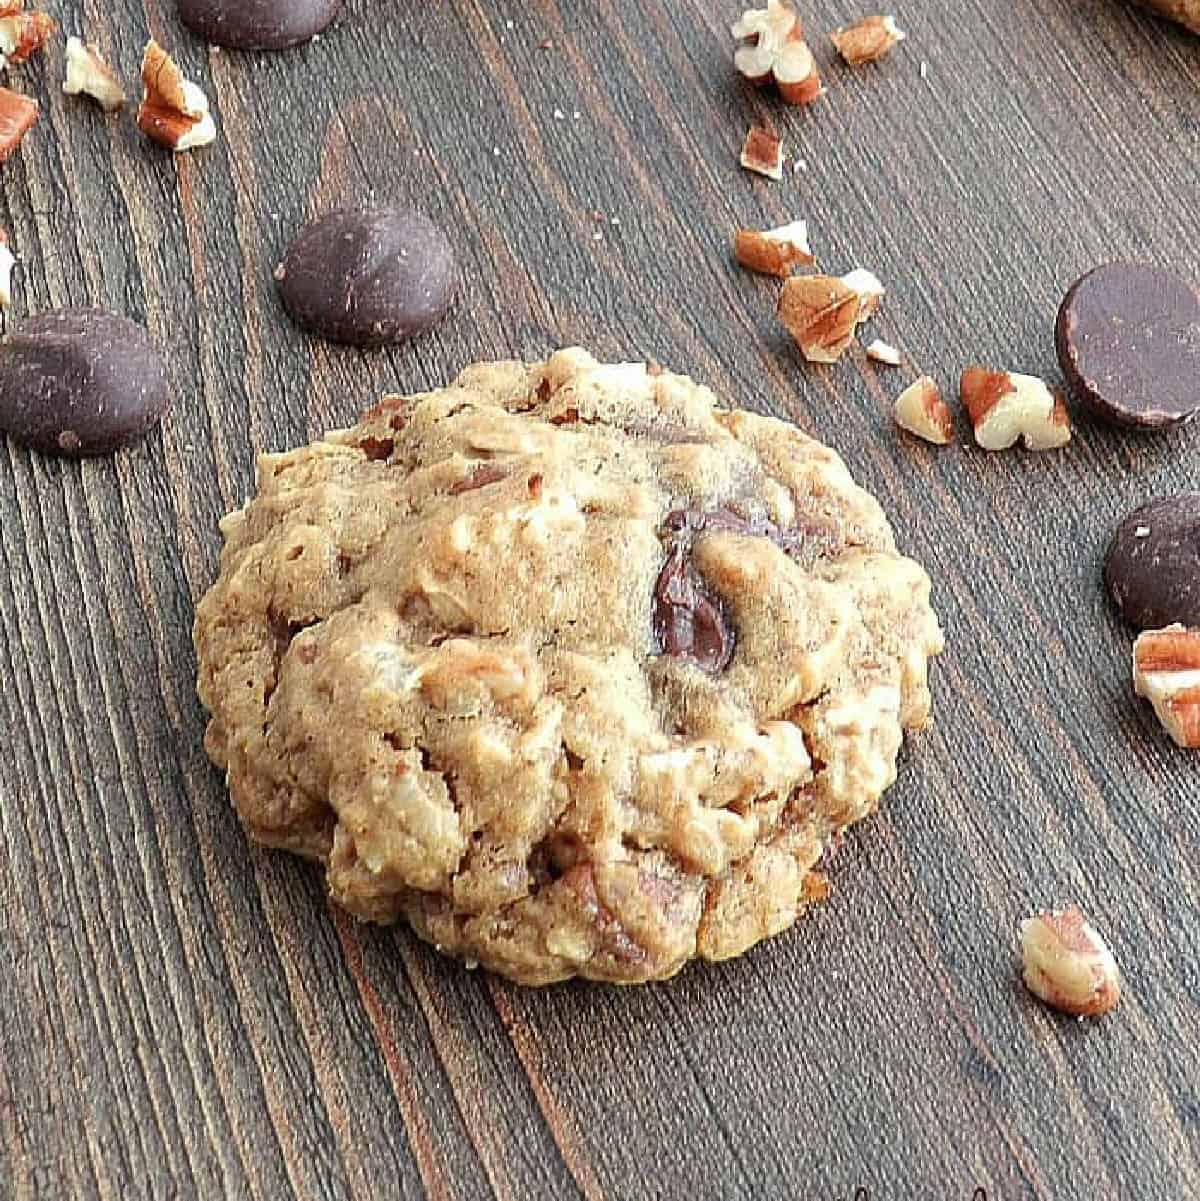 A chocolate chip pecan oatmeal cookie.